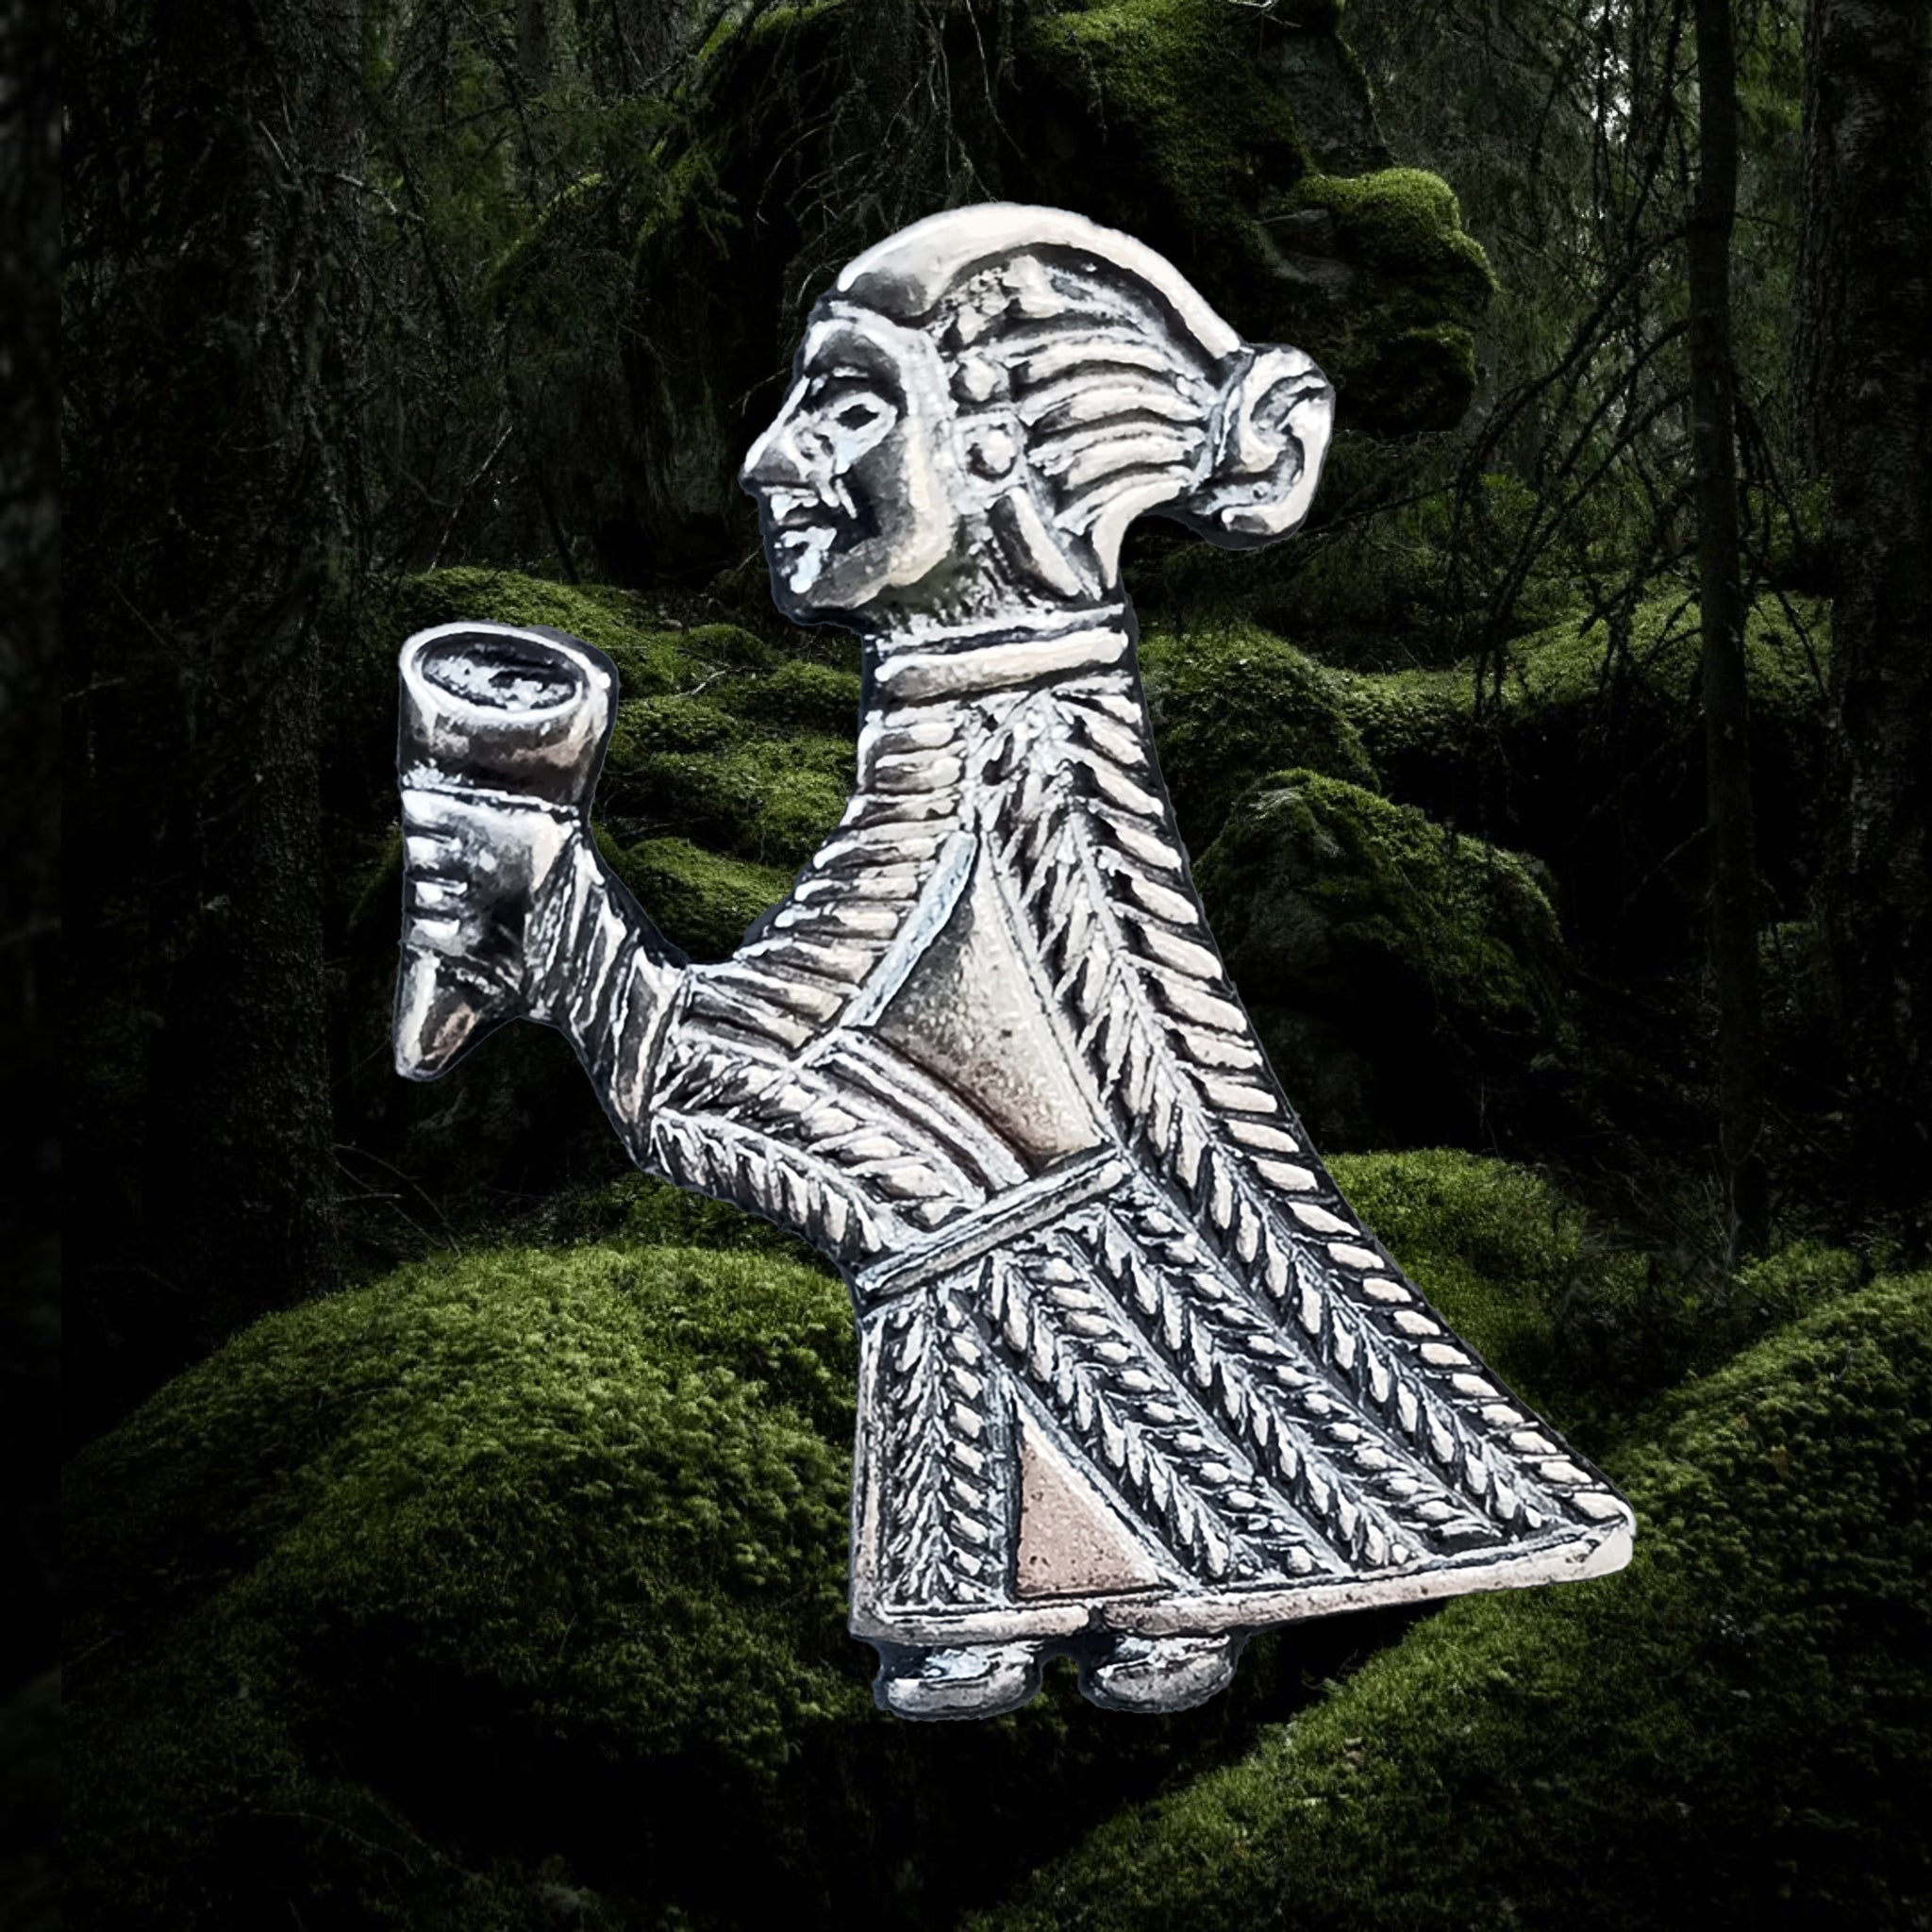 Silver Valkyrie Pendant Replica on Mossy Woods Background